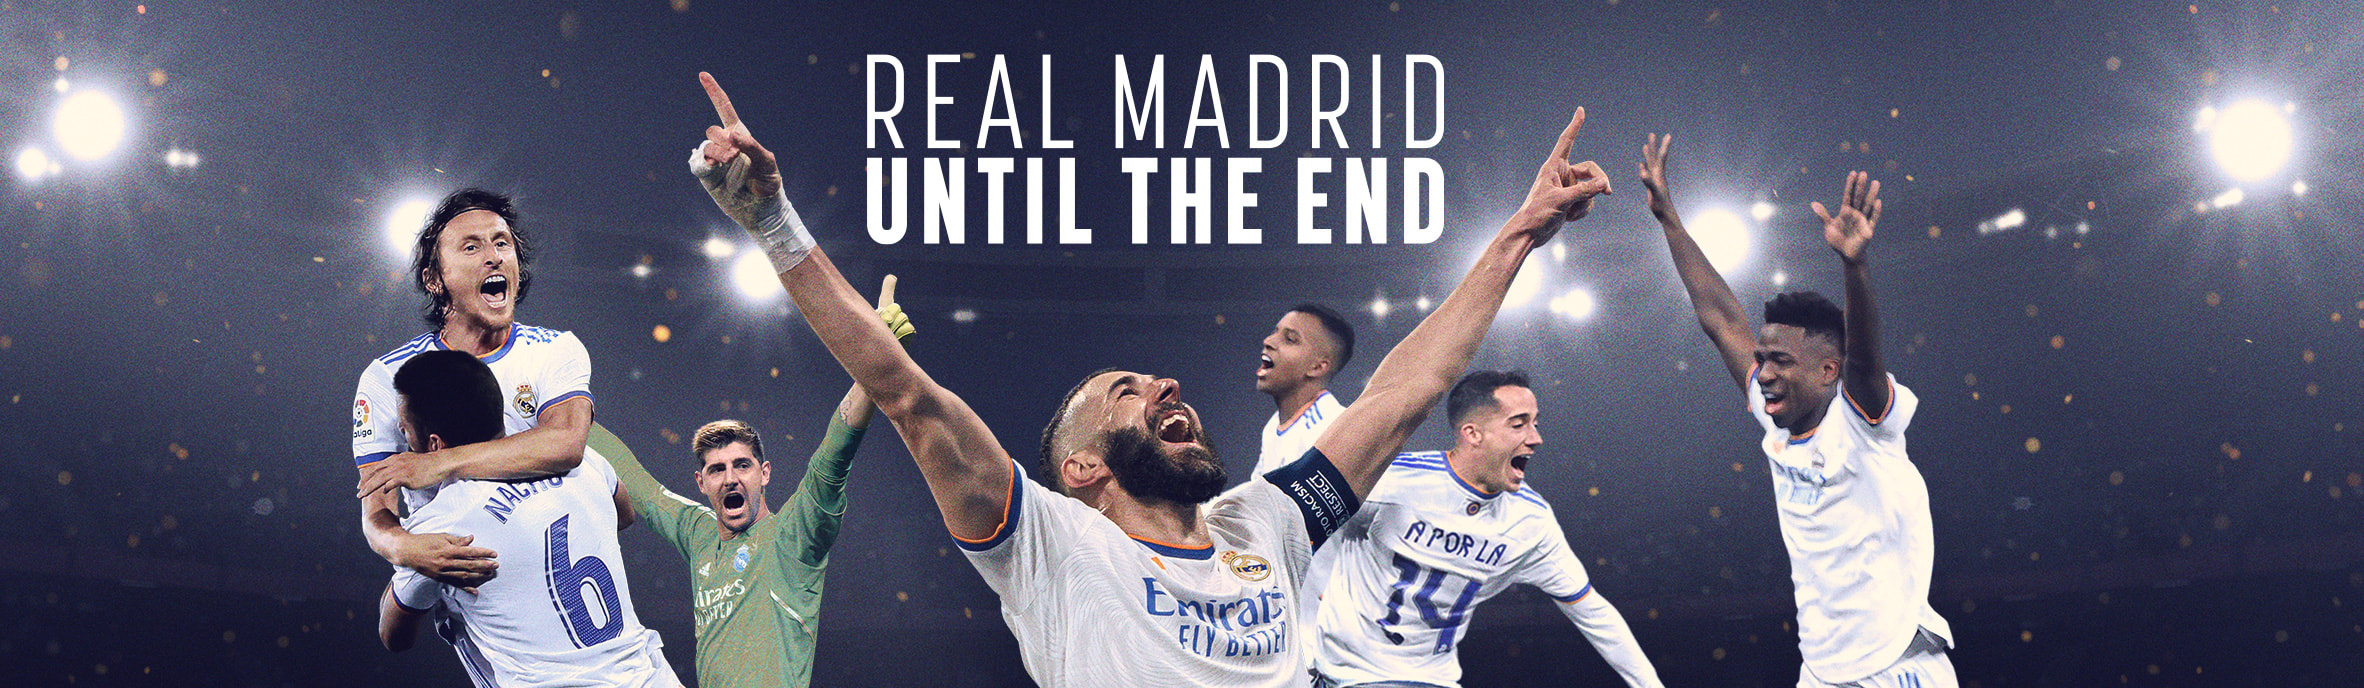 Real Madrid: Until The End - Apple TV+ Press